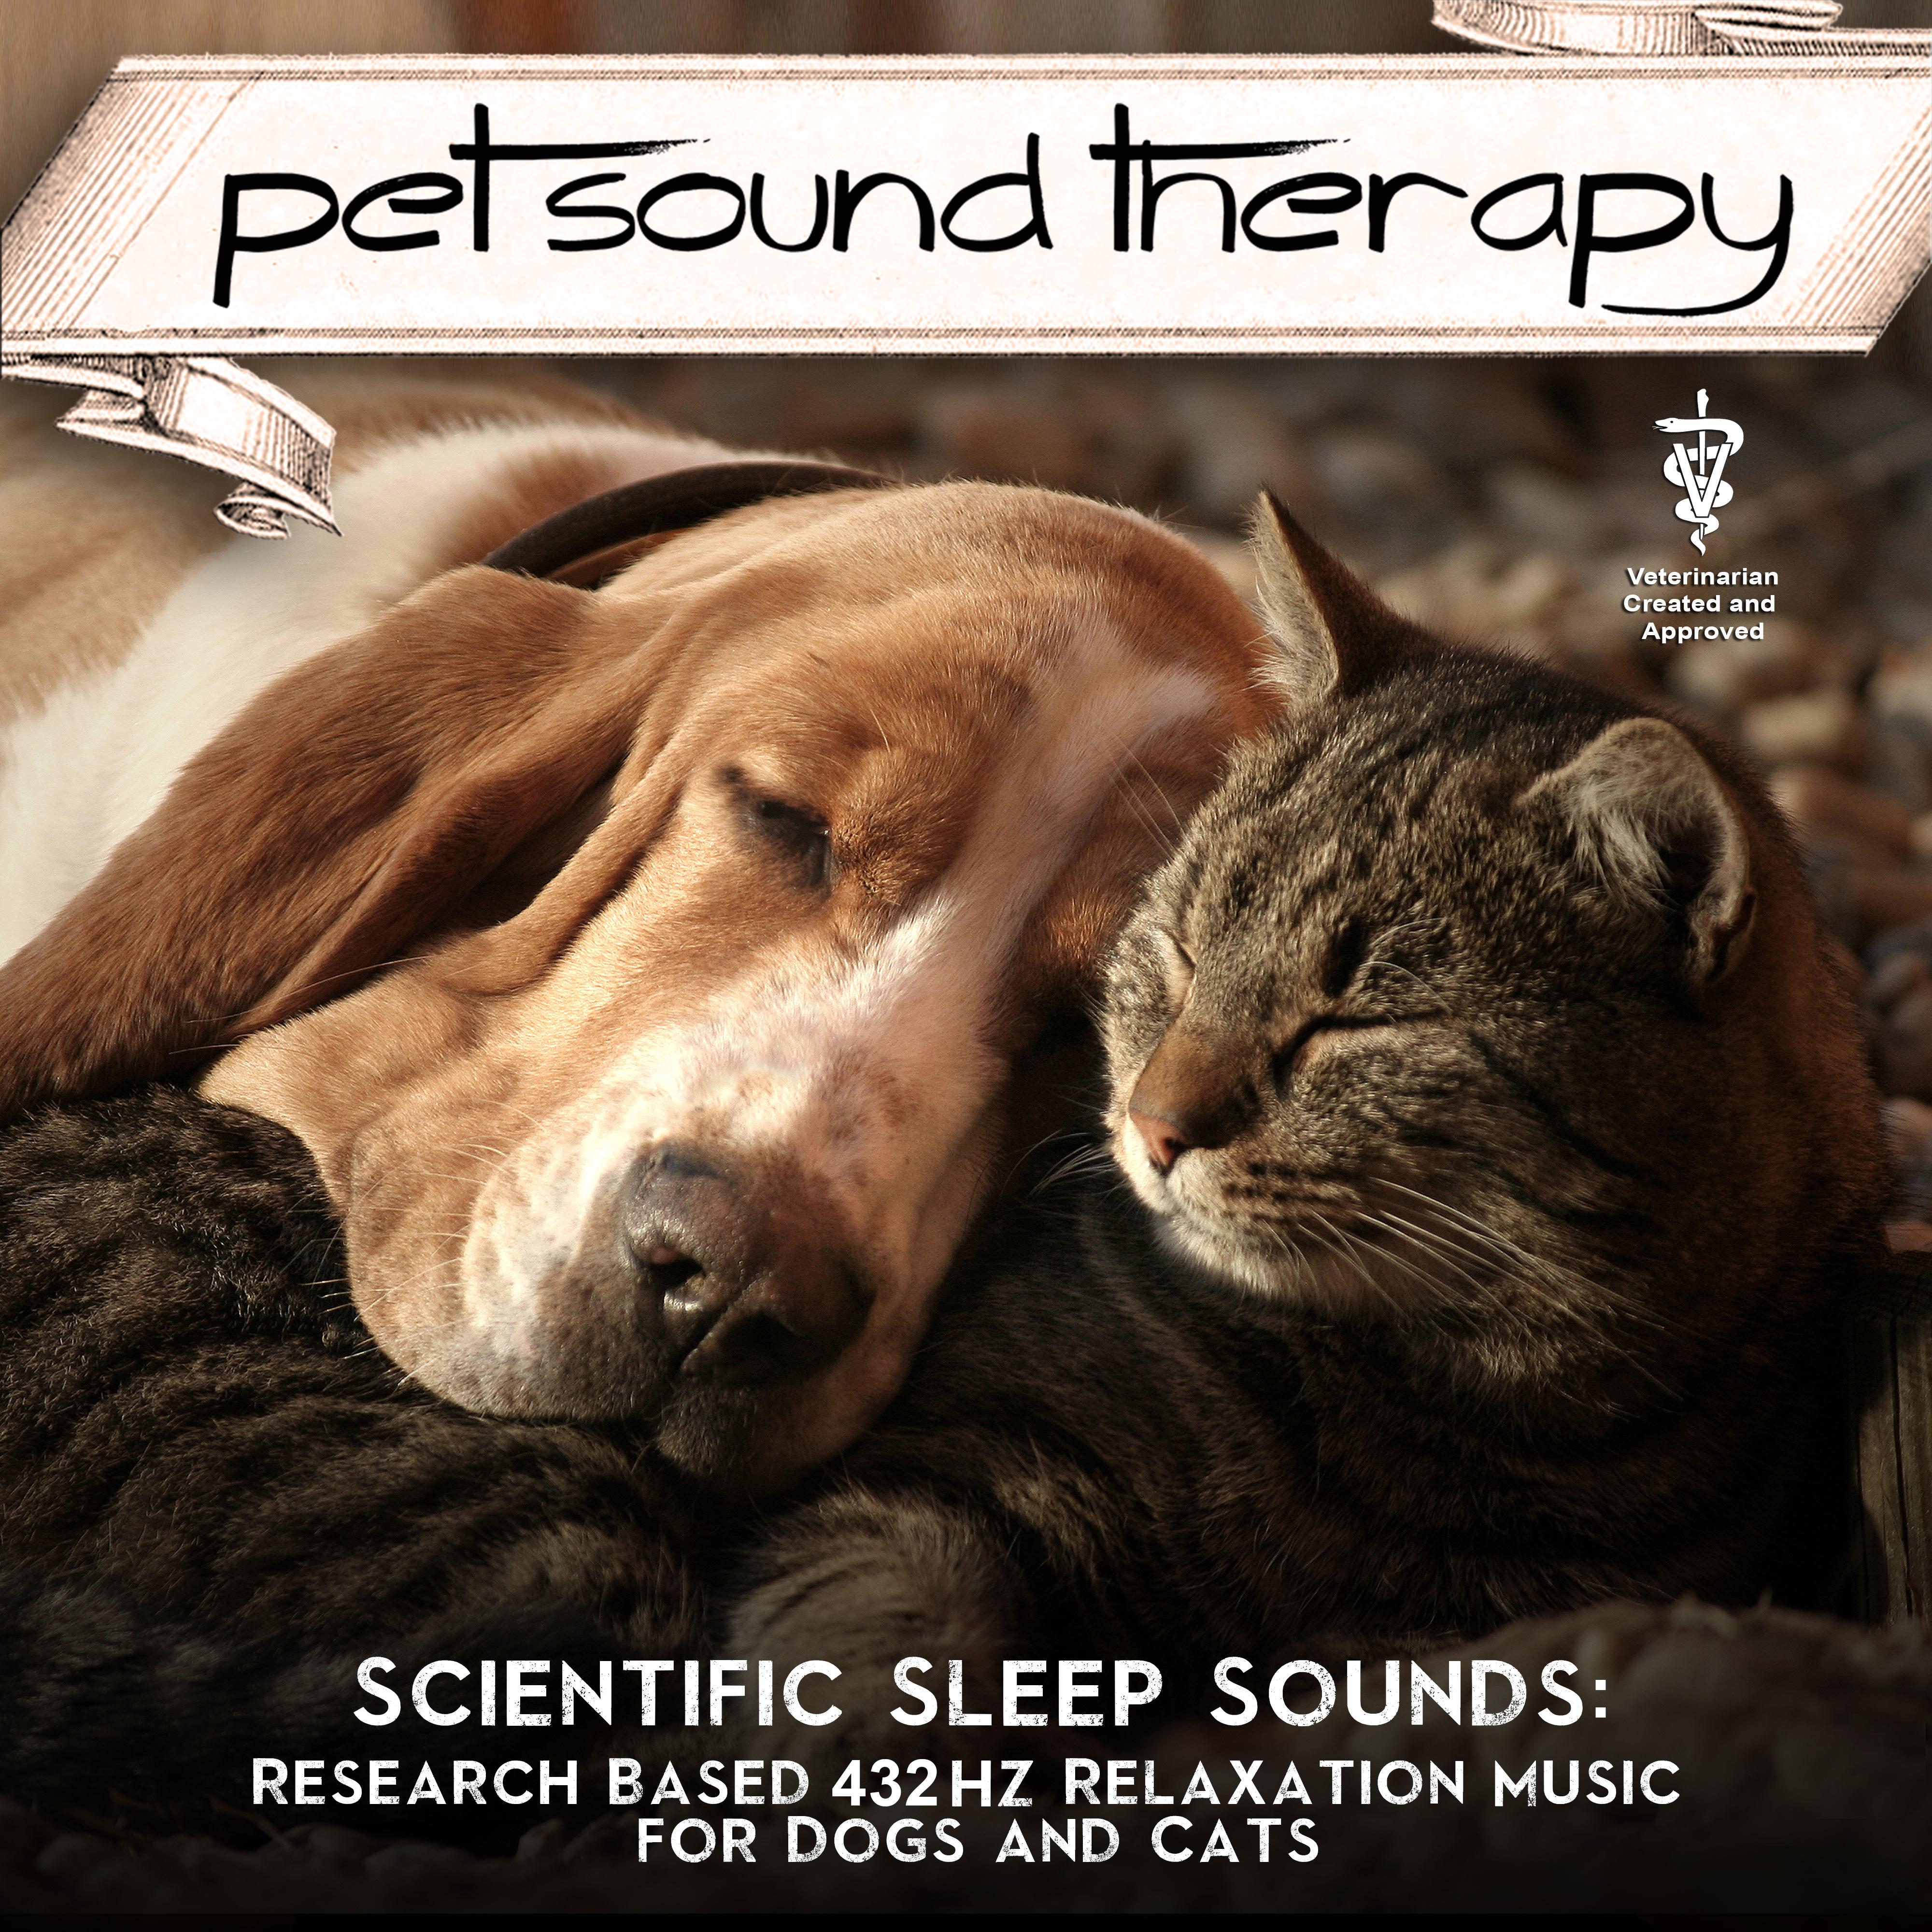 Scientific Sleep Sounds: Research Based 432hz Relaxation Music for Dogs and Cats